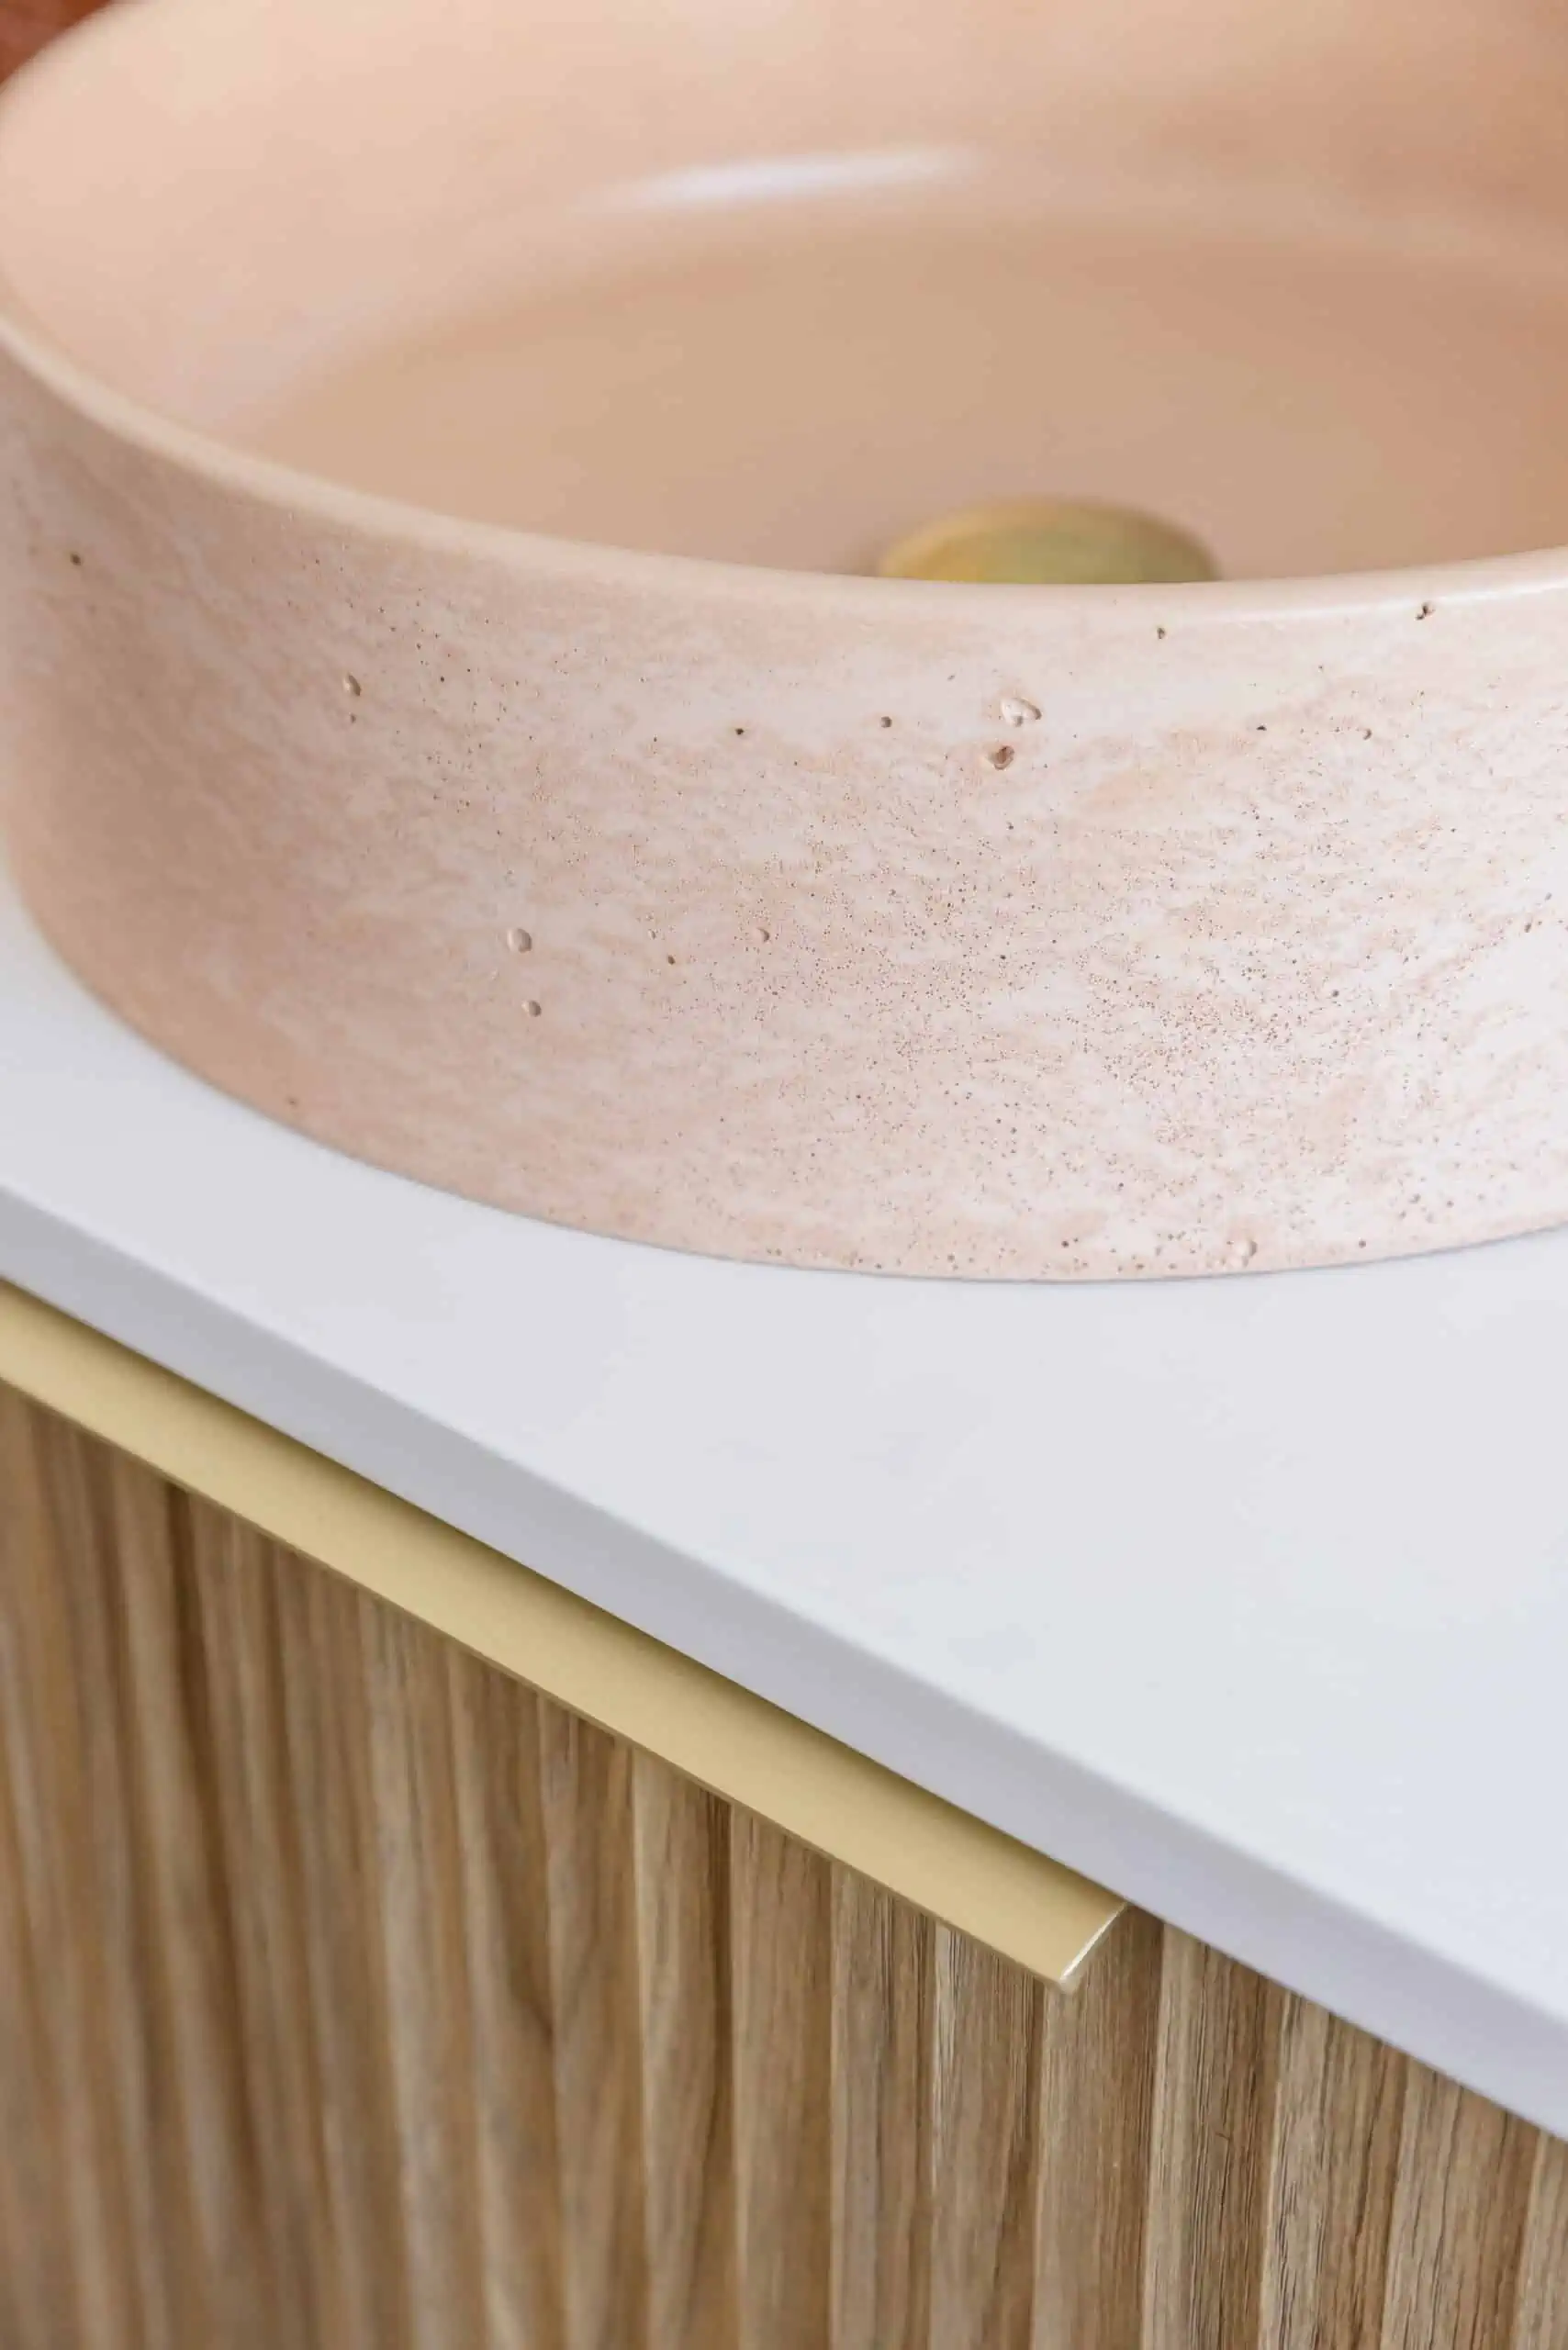 Blush pink and gold bathroom sink